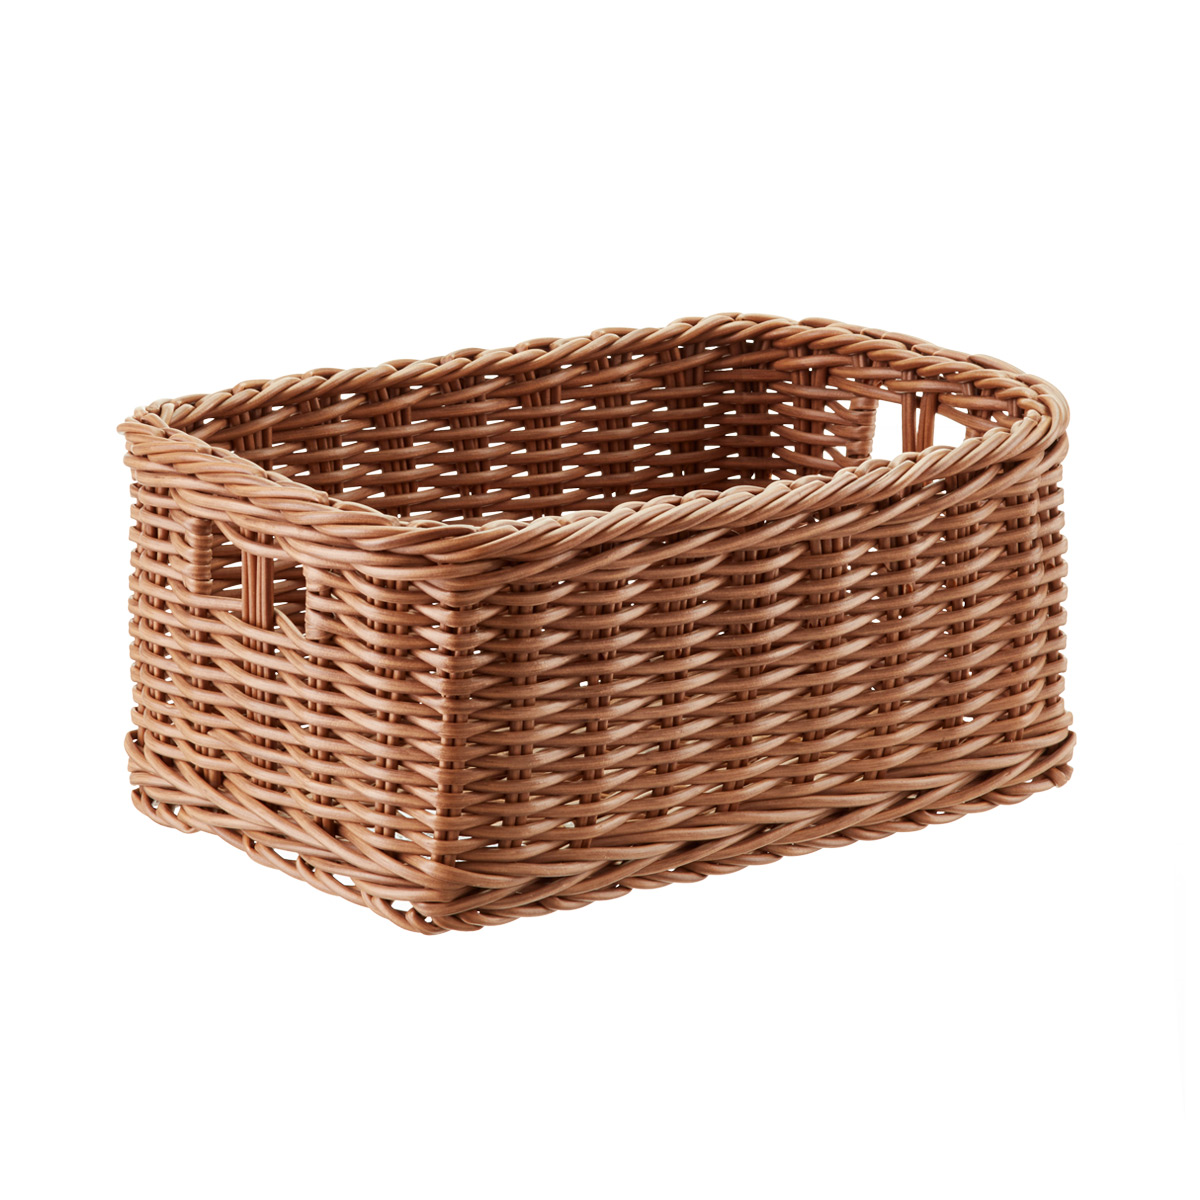 Wicker baskets storage container made of plastic with handles DPGKVYF